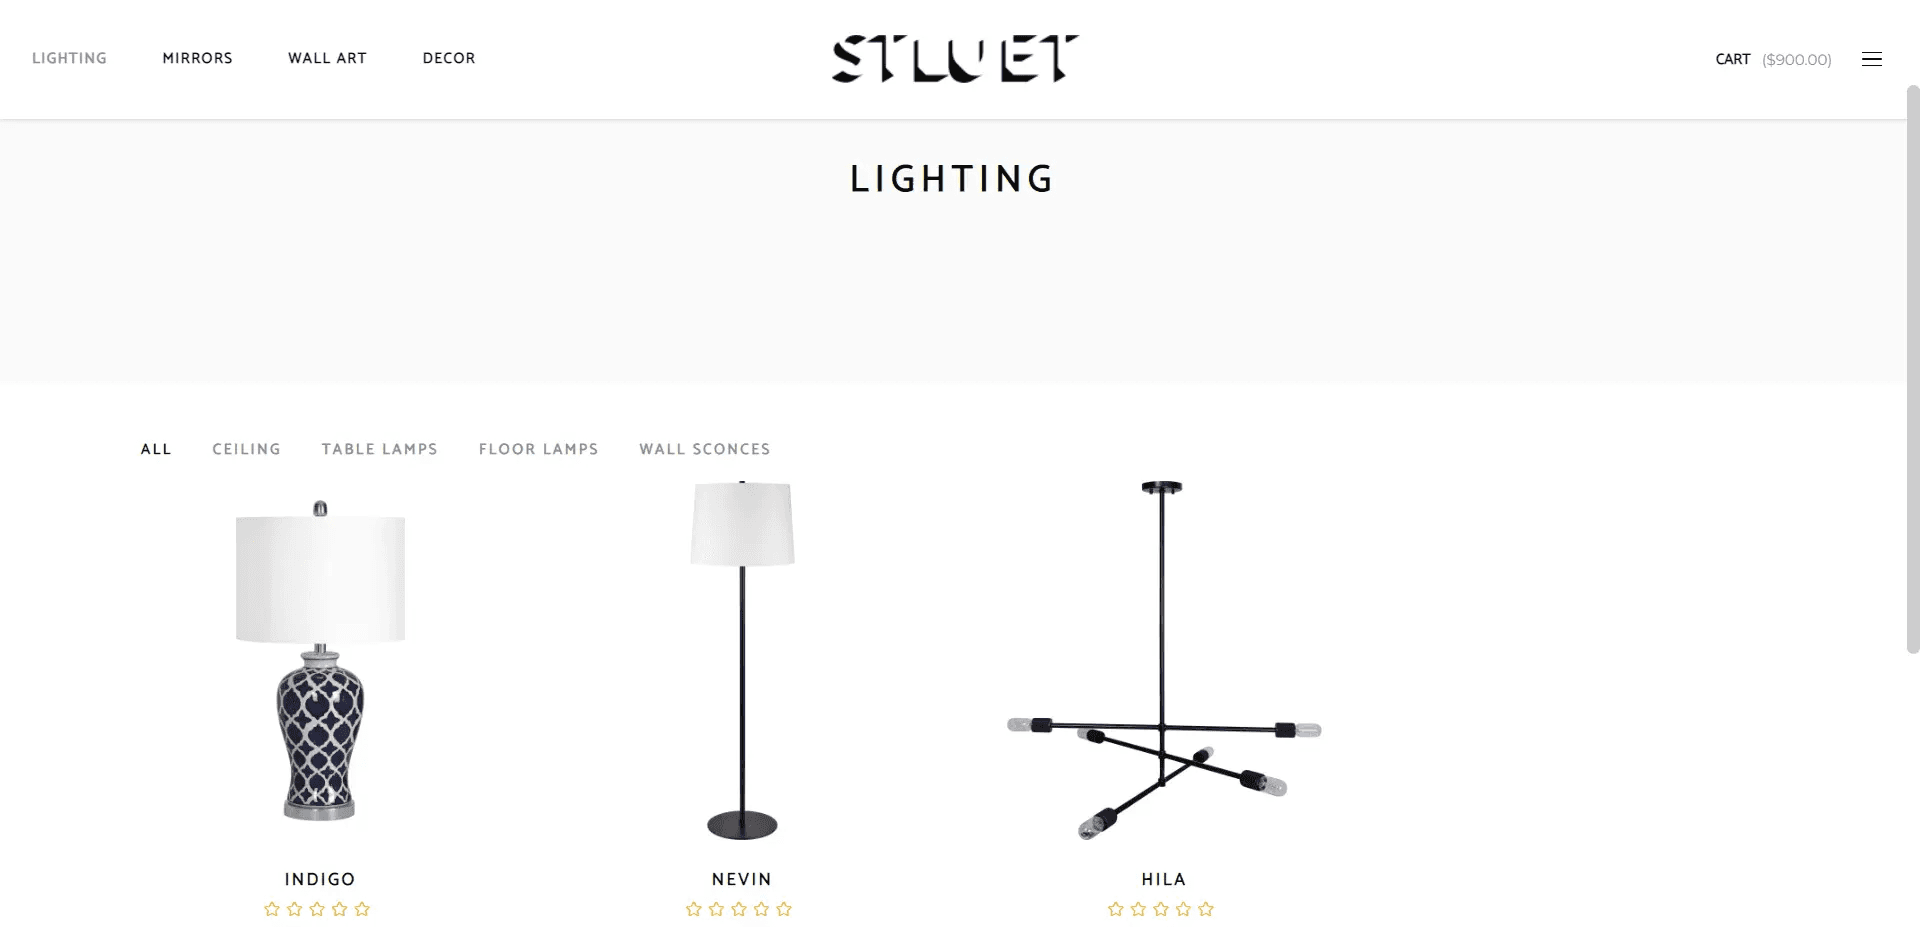 On the lighting page, divided into 'all', 'ceiling', 'table lamps', 'floor lamps', and 'wall sconces', three products are currently visible